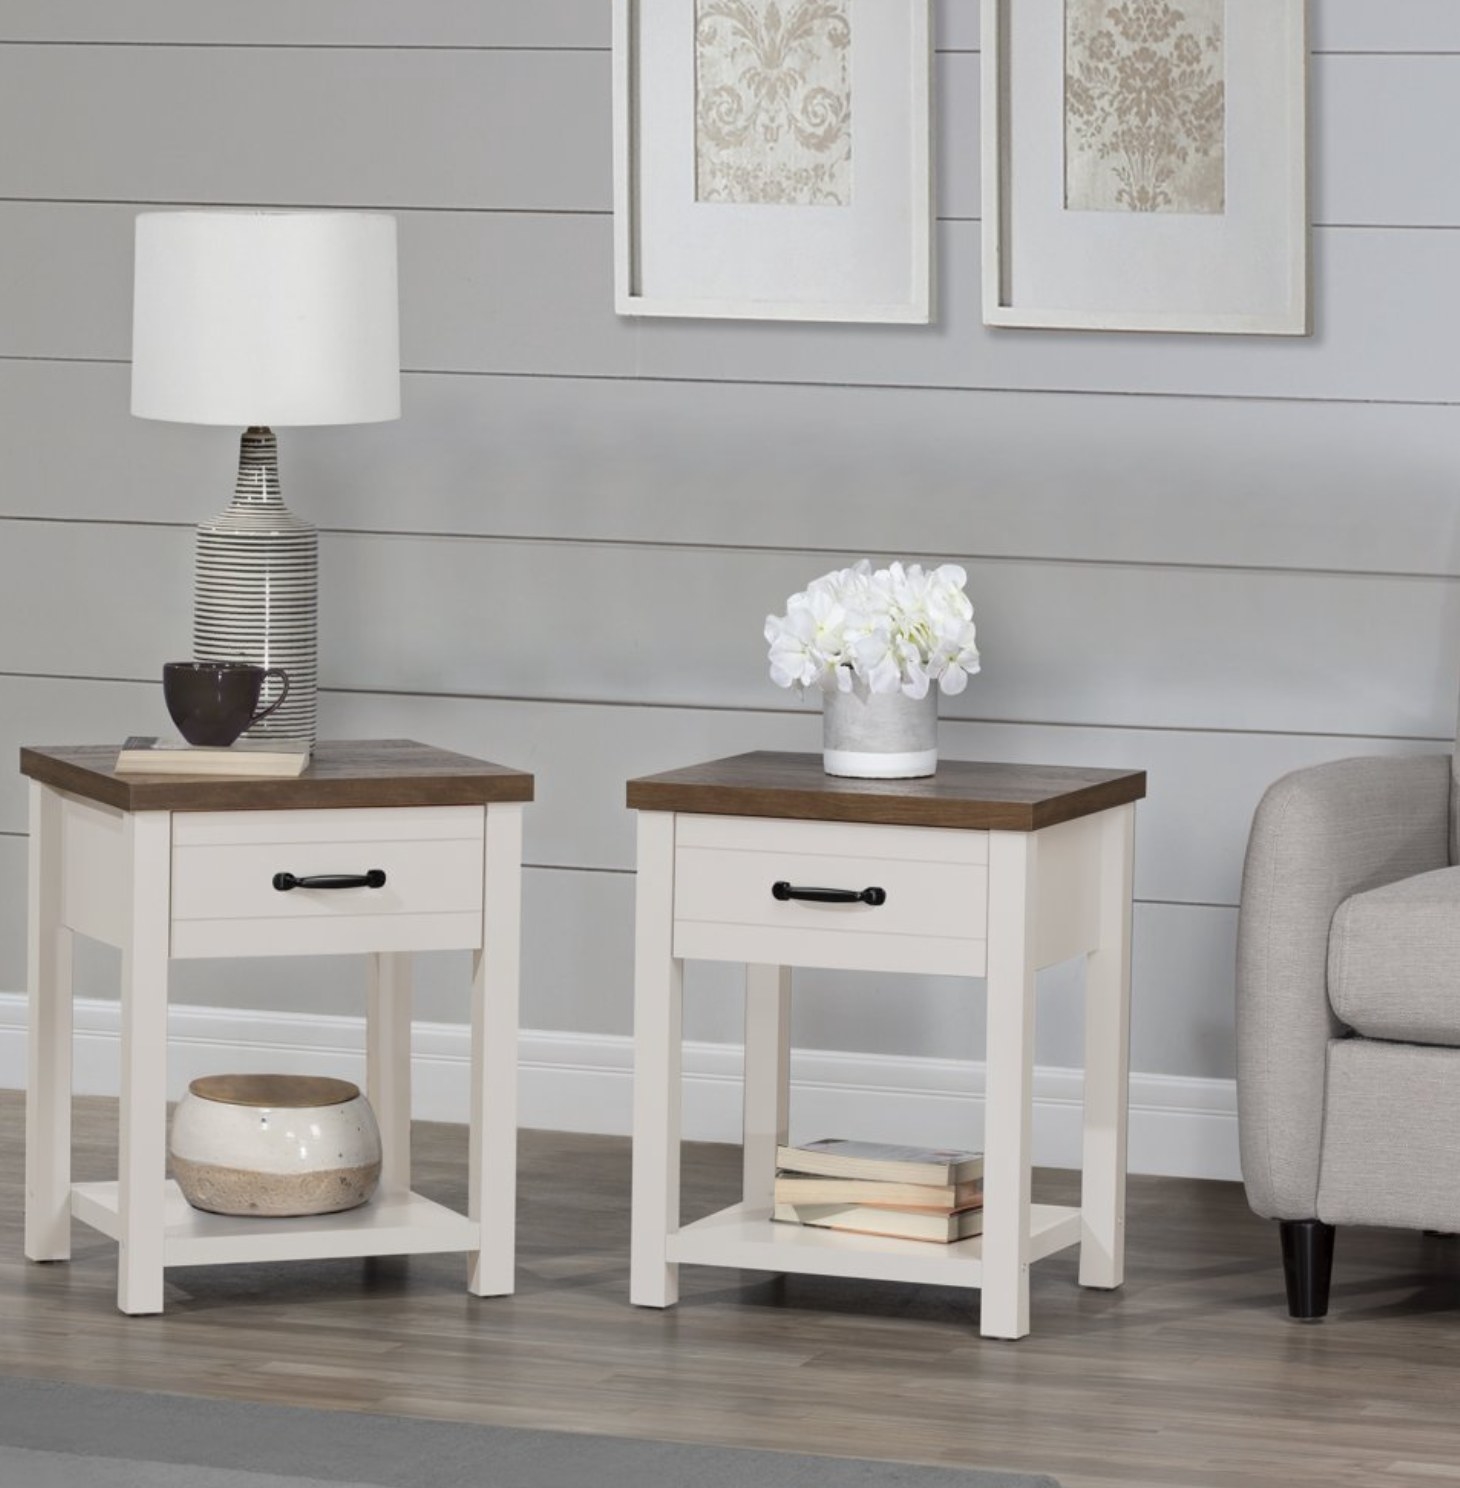 The nightstands in ivory